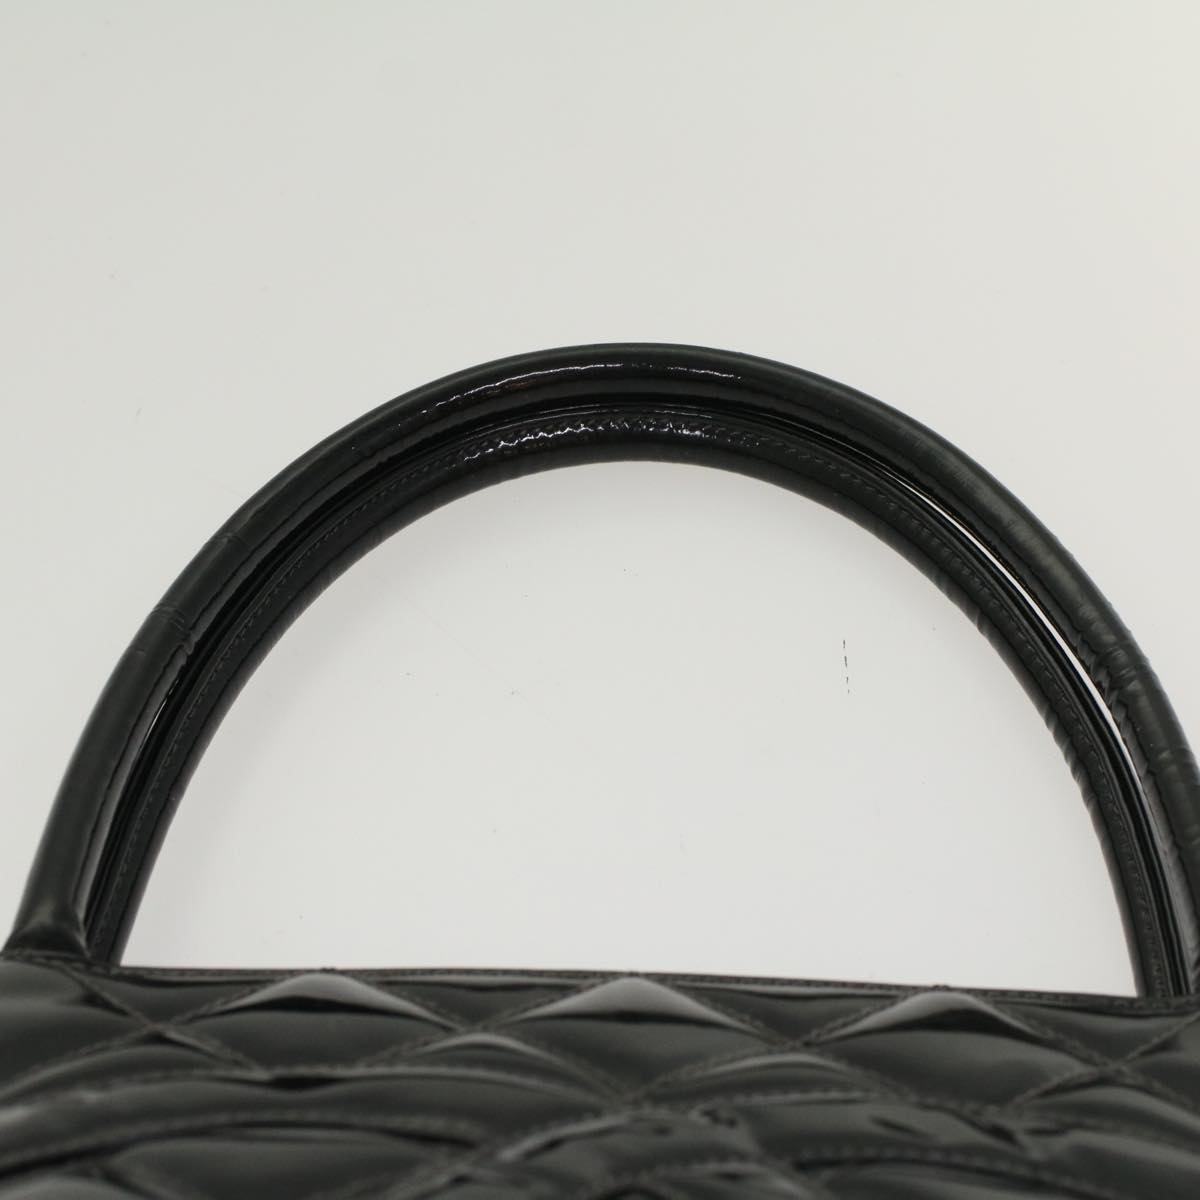 CHANEL Tote Bag Patent leather Reprint Edition Black CC Auth am4745